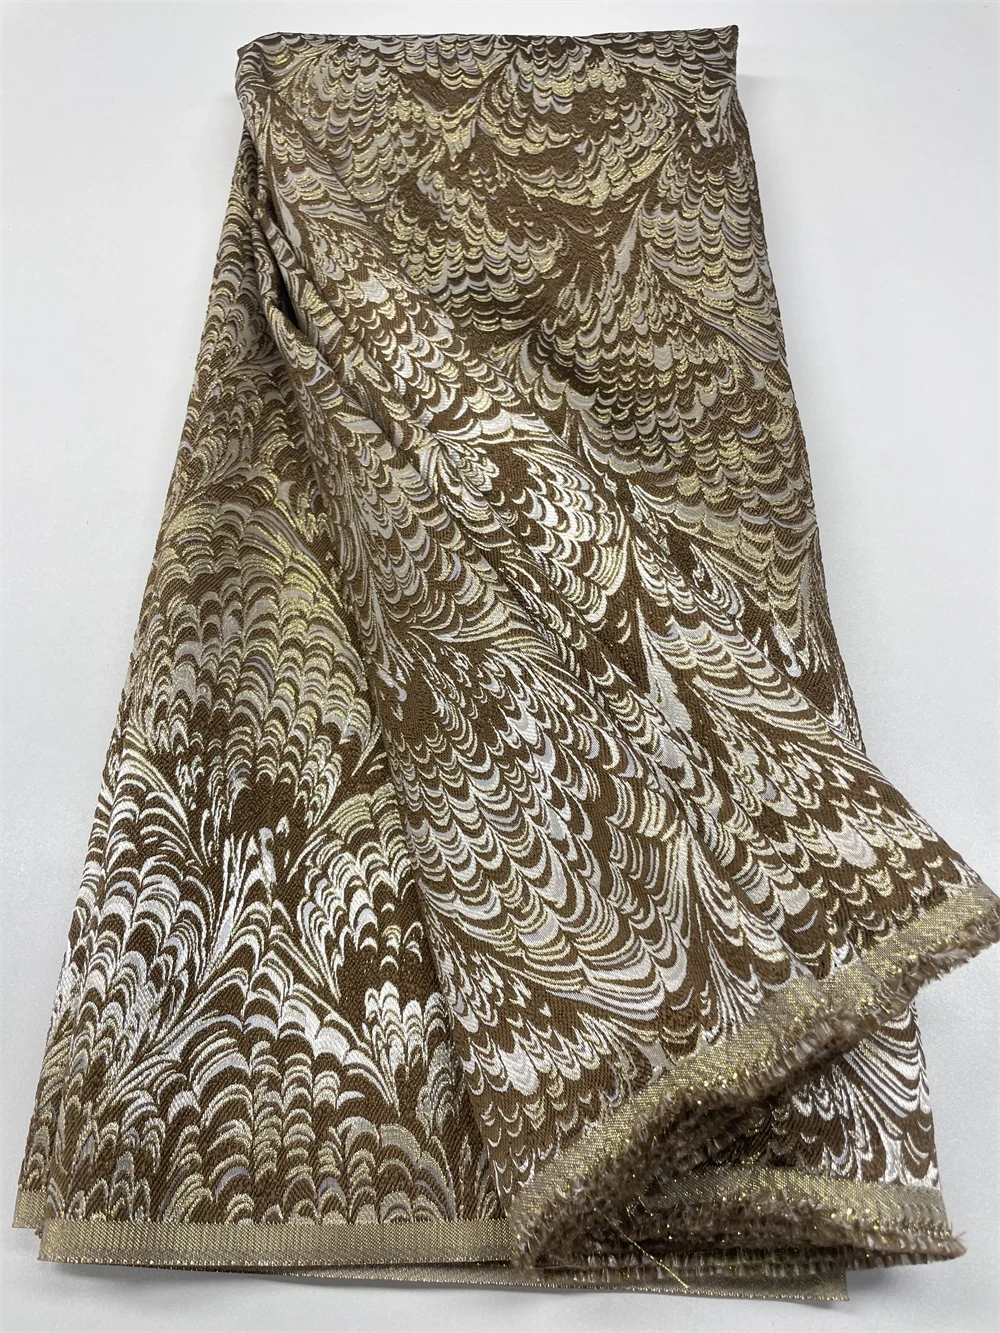 Nigerian Brocade Jacquard Lace Fabric French Lace Fabric 2023 High Quality African Lace Fabric For Women Party Material PL296-4 latest brocade lace fabric 2023 high quality gold line jacquard lace fabric african lace fabric nigerian dress for women a3579